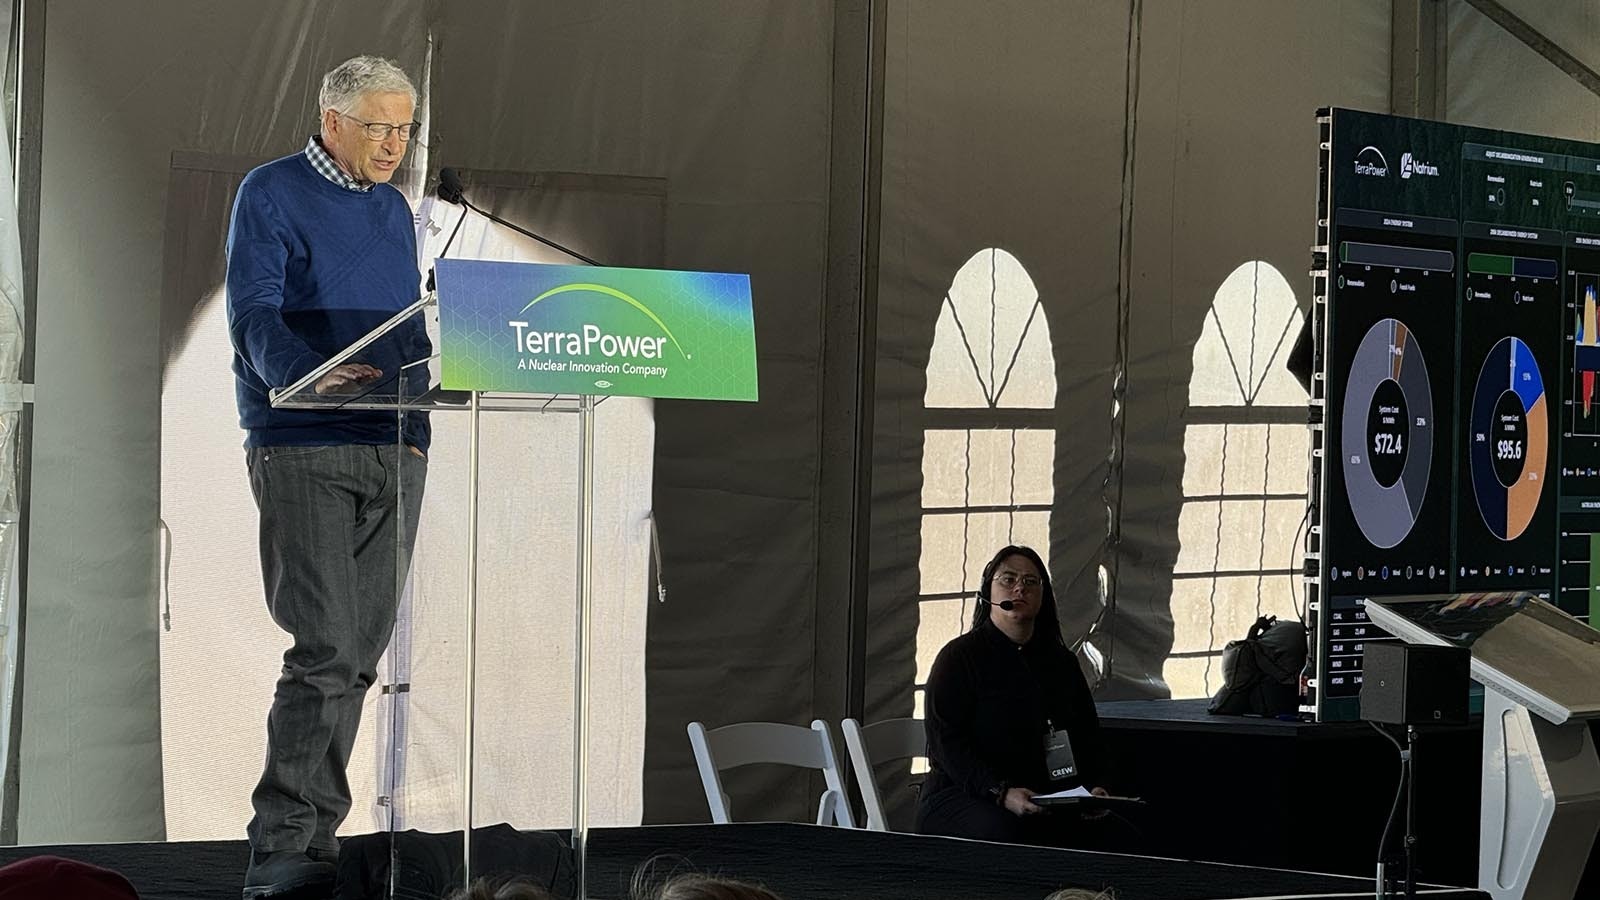 Billionaire Bill Gates told a crowd of 300 people who attended the groundbreaking ceremony for TerraPower’s nuclear reactor project in Kemmerer, Wyoming, that TerraPower’s work has been a dream of his since 2005.